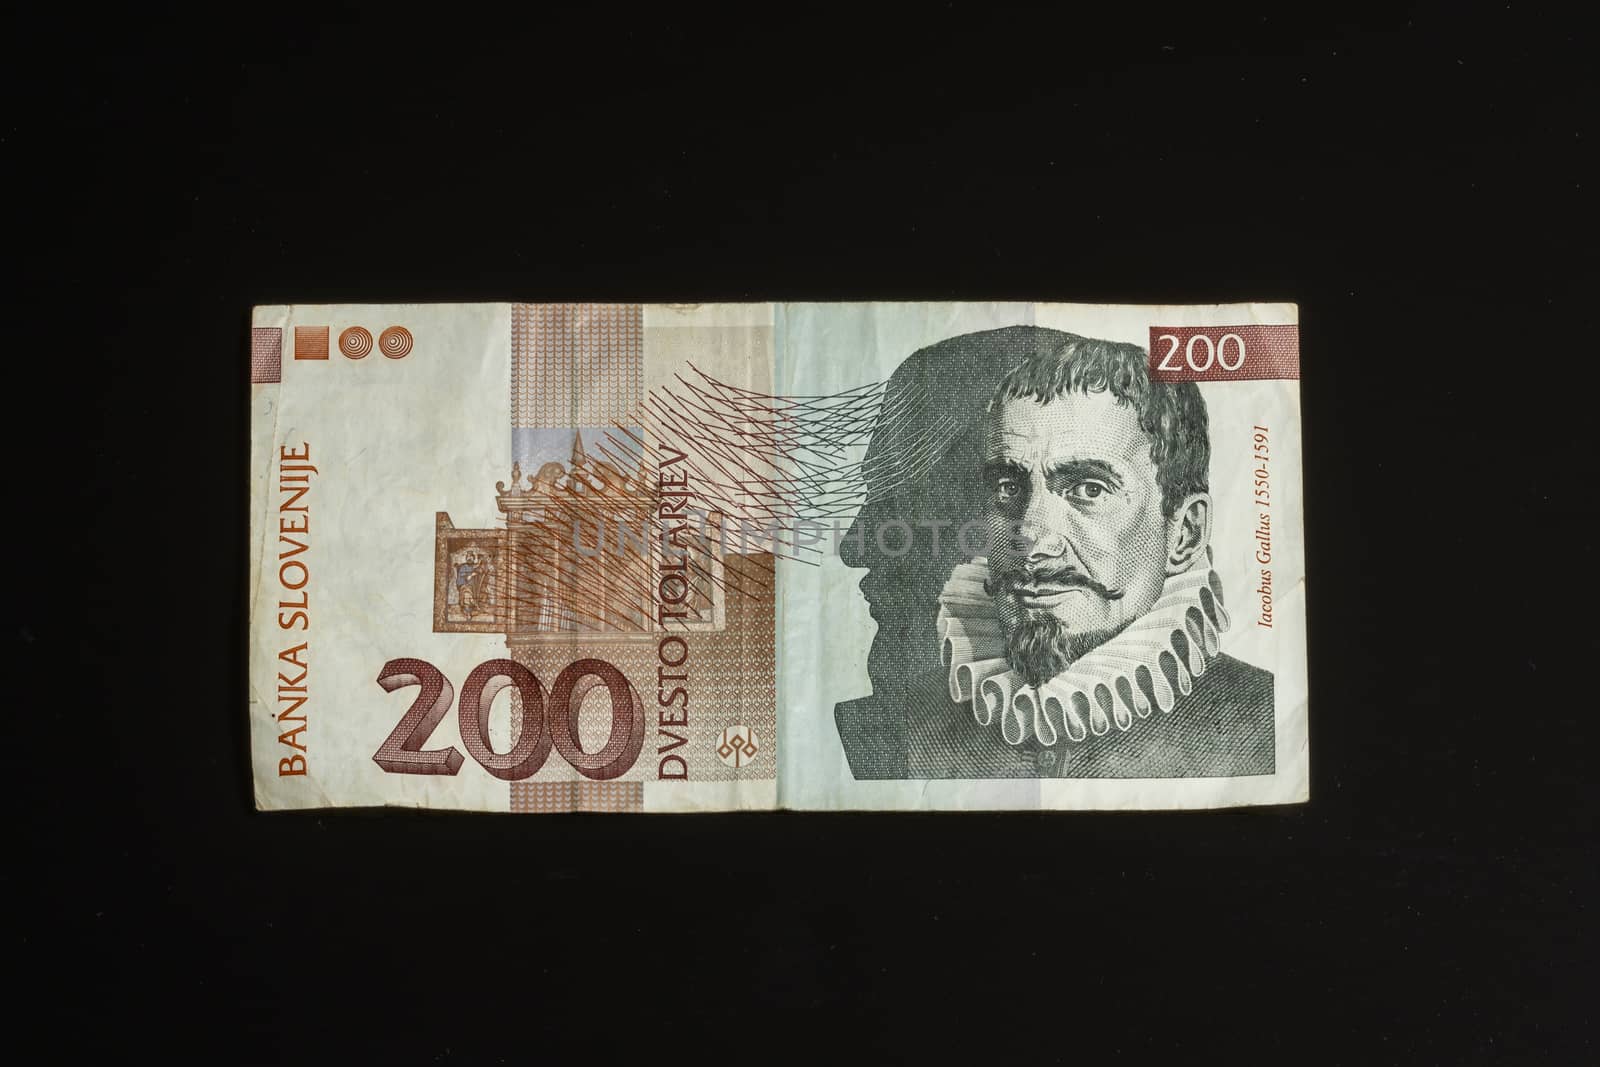 Obsolete 200 tolar bill of Slovenia, became obsolete with introduction of Euro currency, isolated on black background